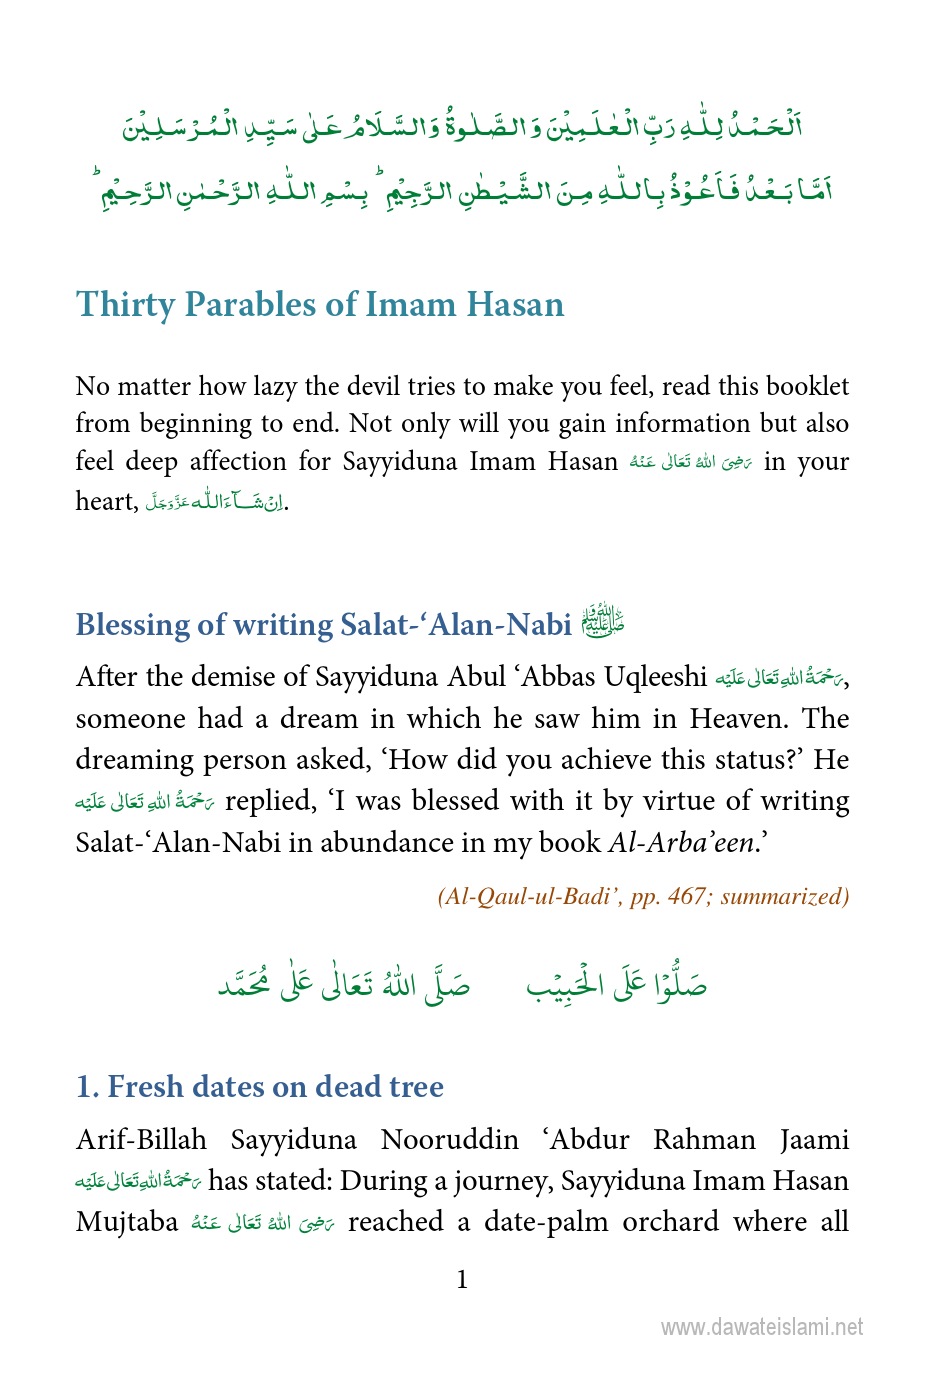 ThirtyParablesOfImamHasan.pdf, 36- pages 